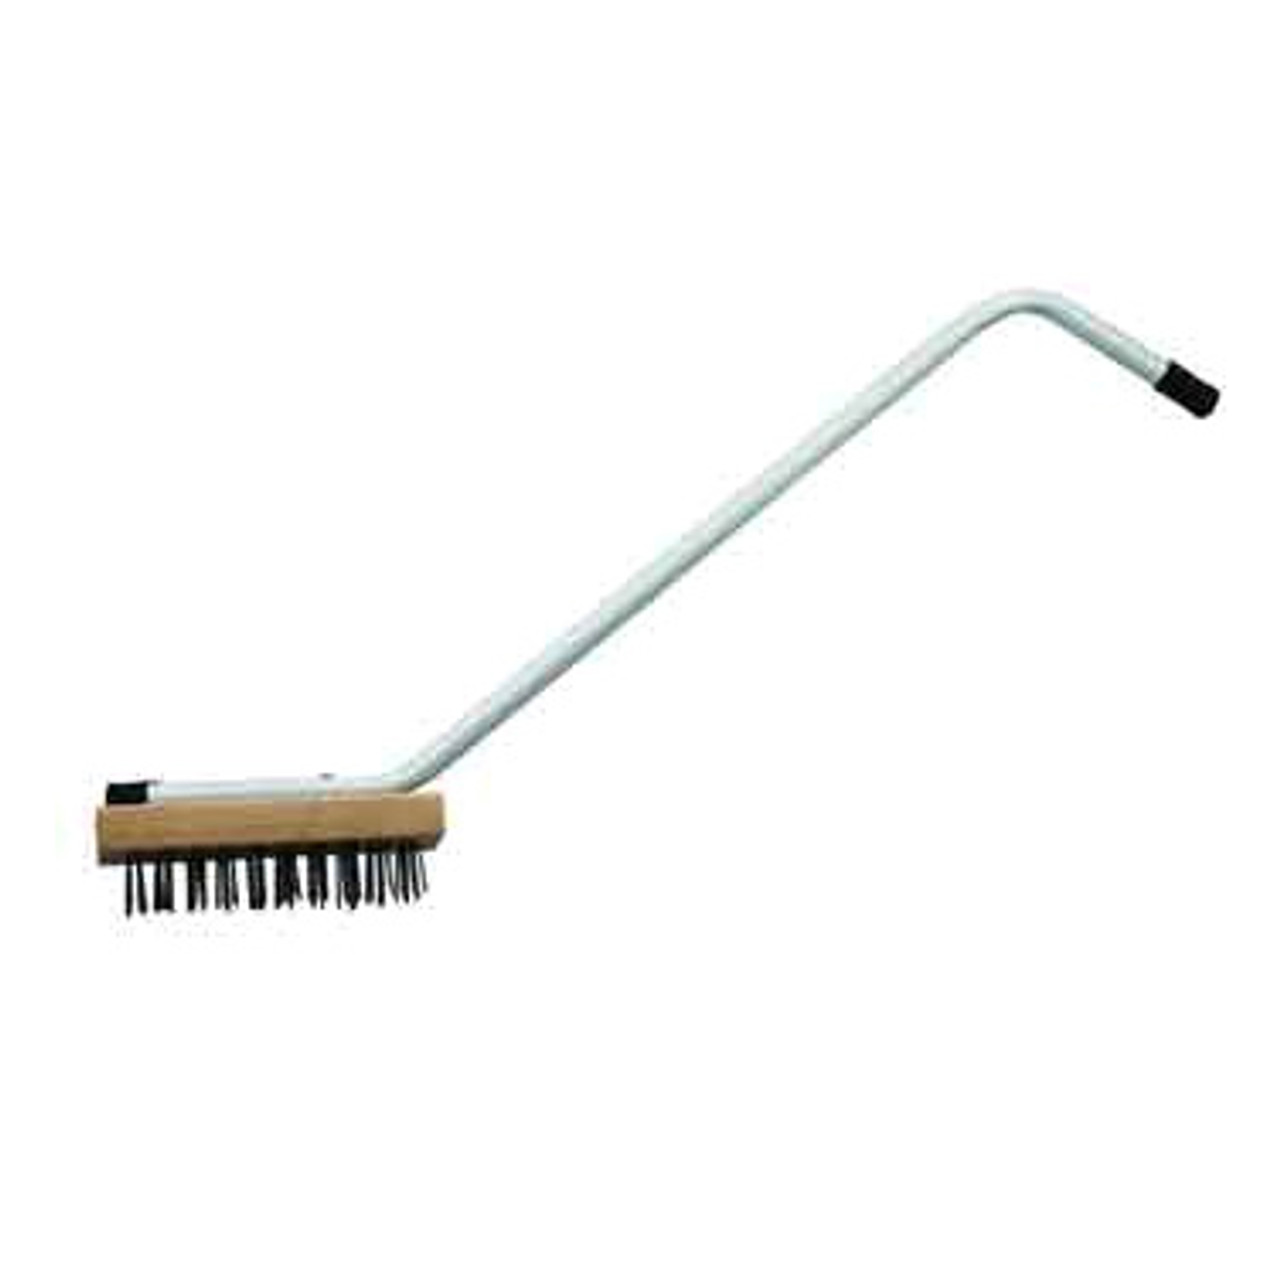 Carlisle 4029400 48 Double Head Broiler / Grill Cleaning Brush